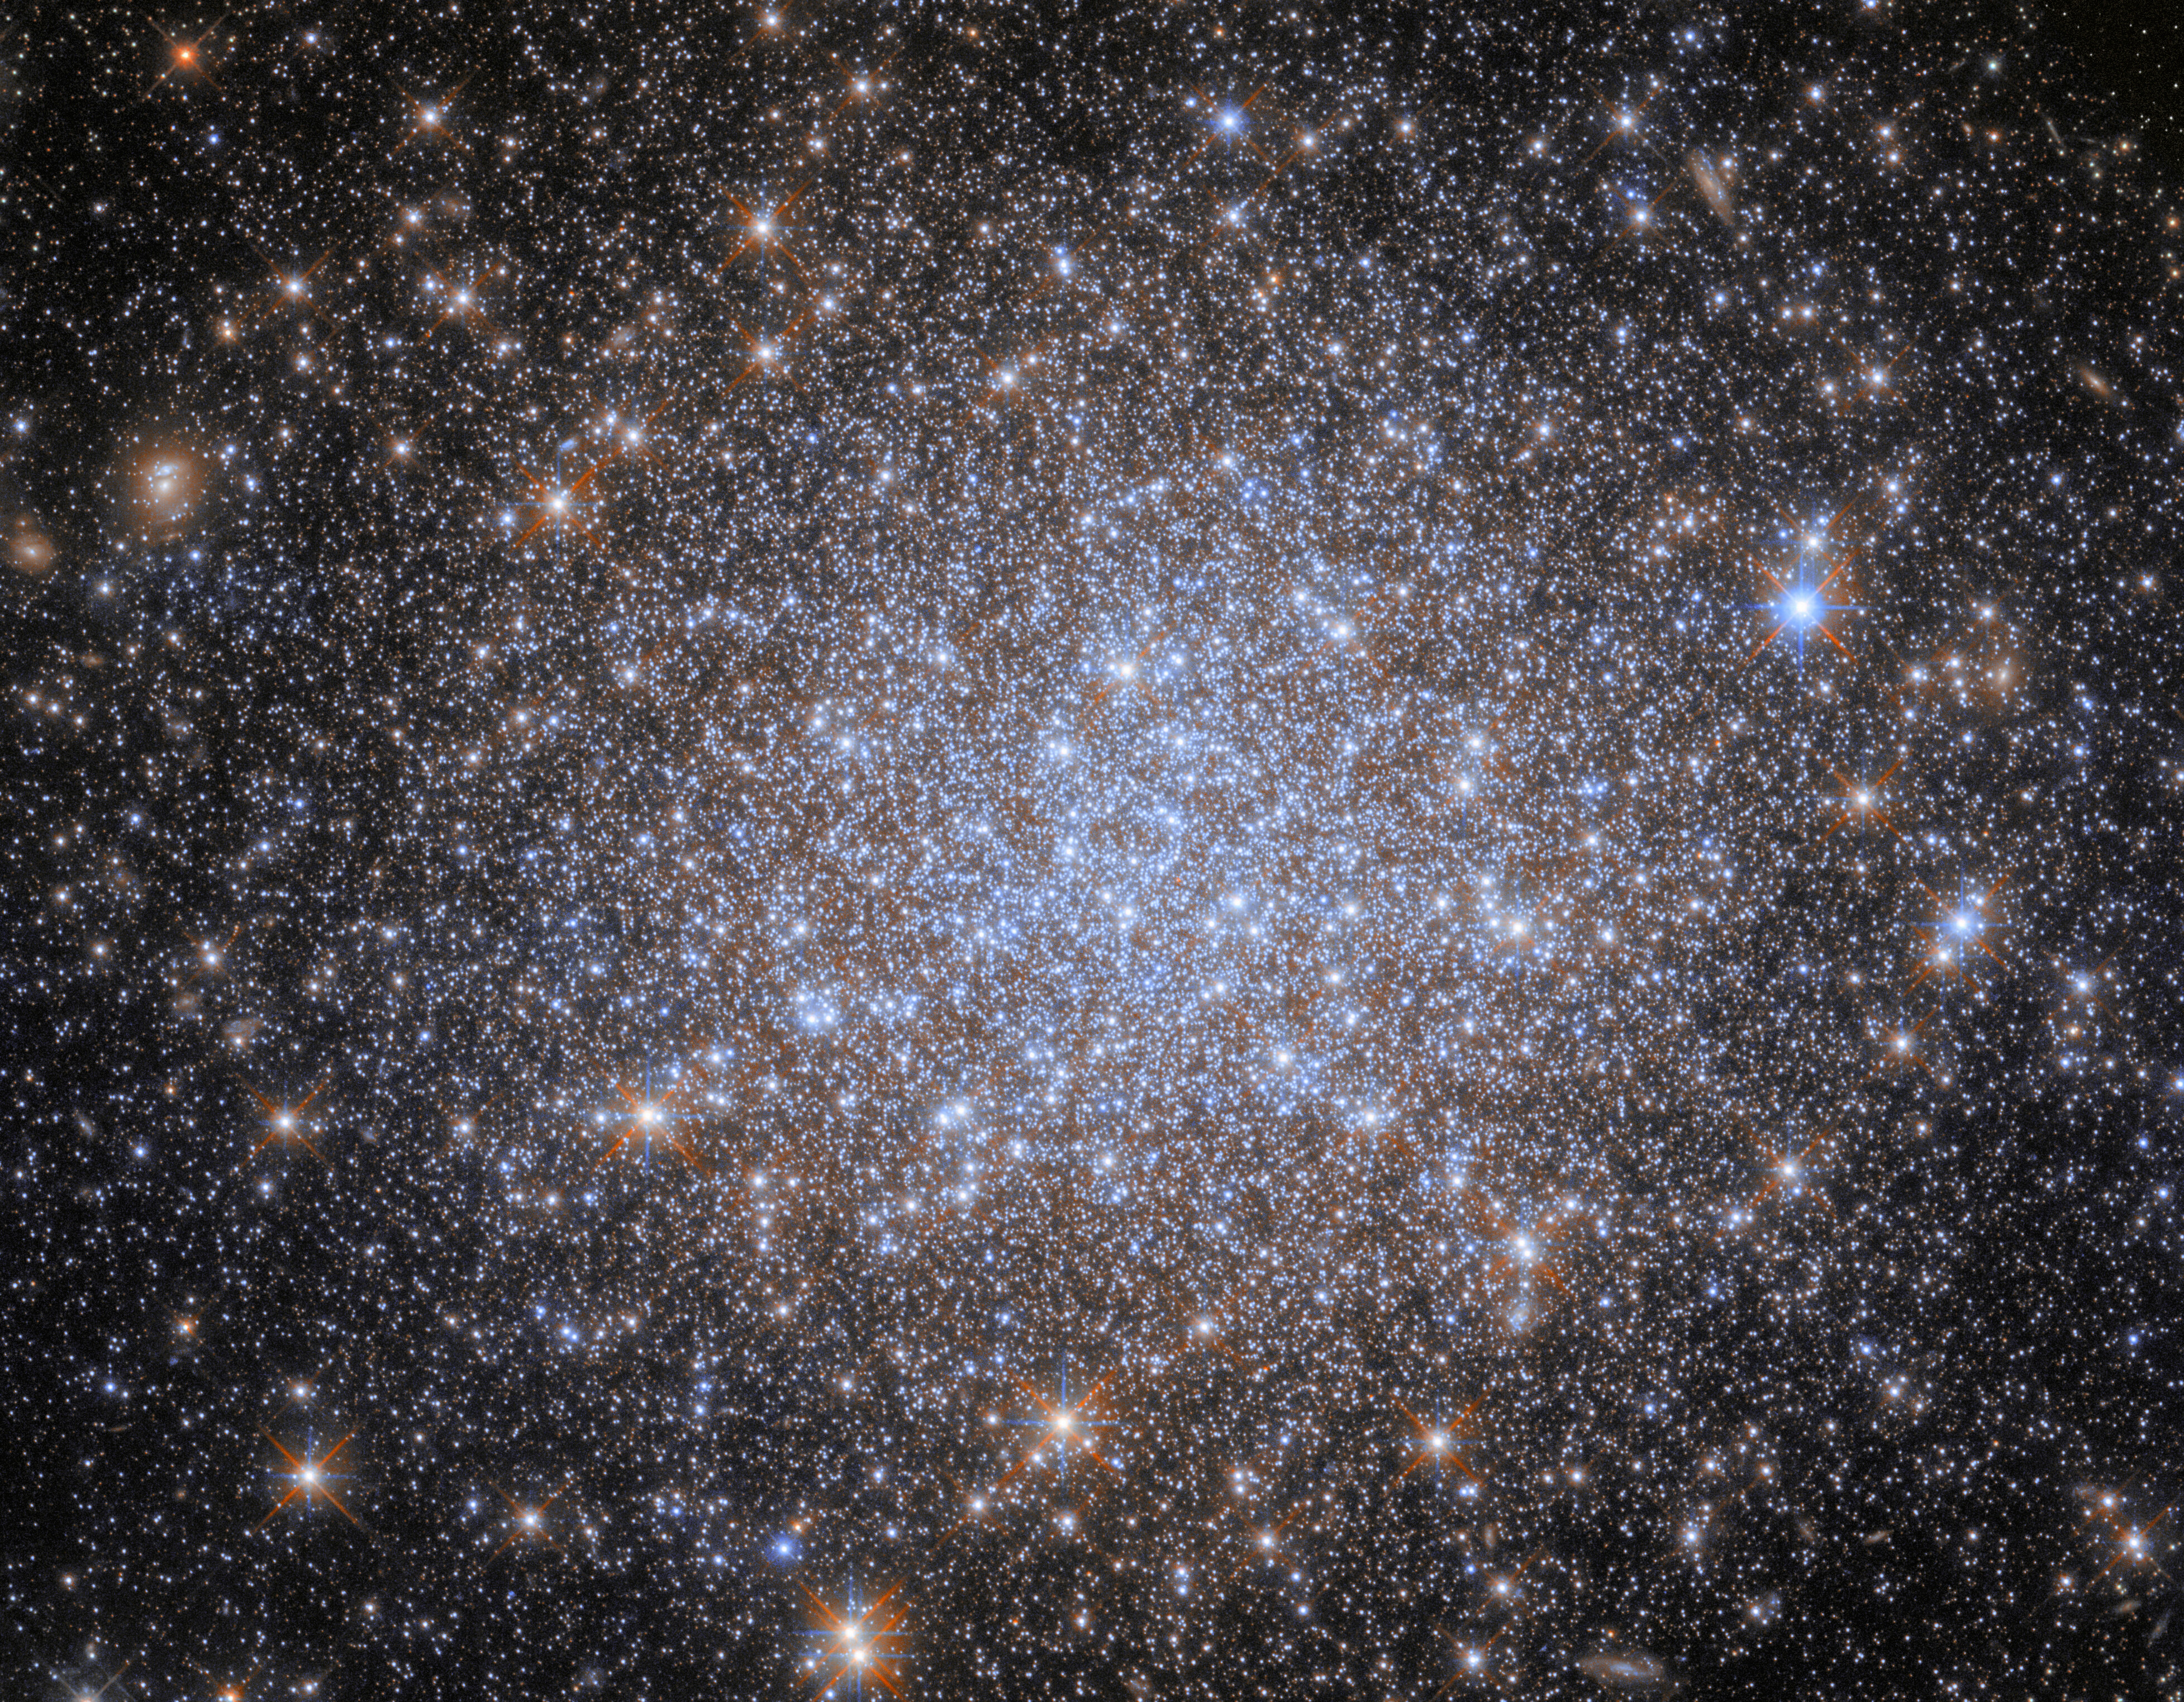 A cluster of stars. Most of the stars are very small and uniform in size, and they are notably bluish and cluster more densely together toward the center of the image. Some appear larger in the foreground. The stars give way to a dark background at the corners.